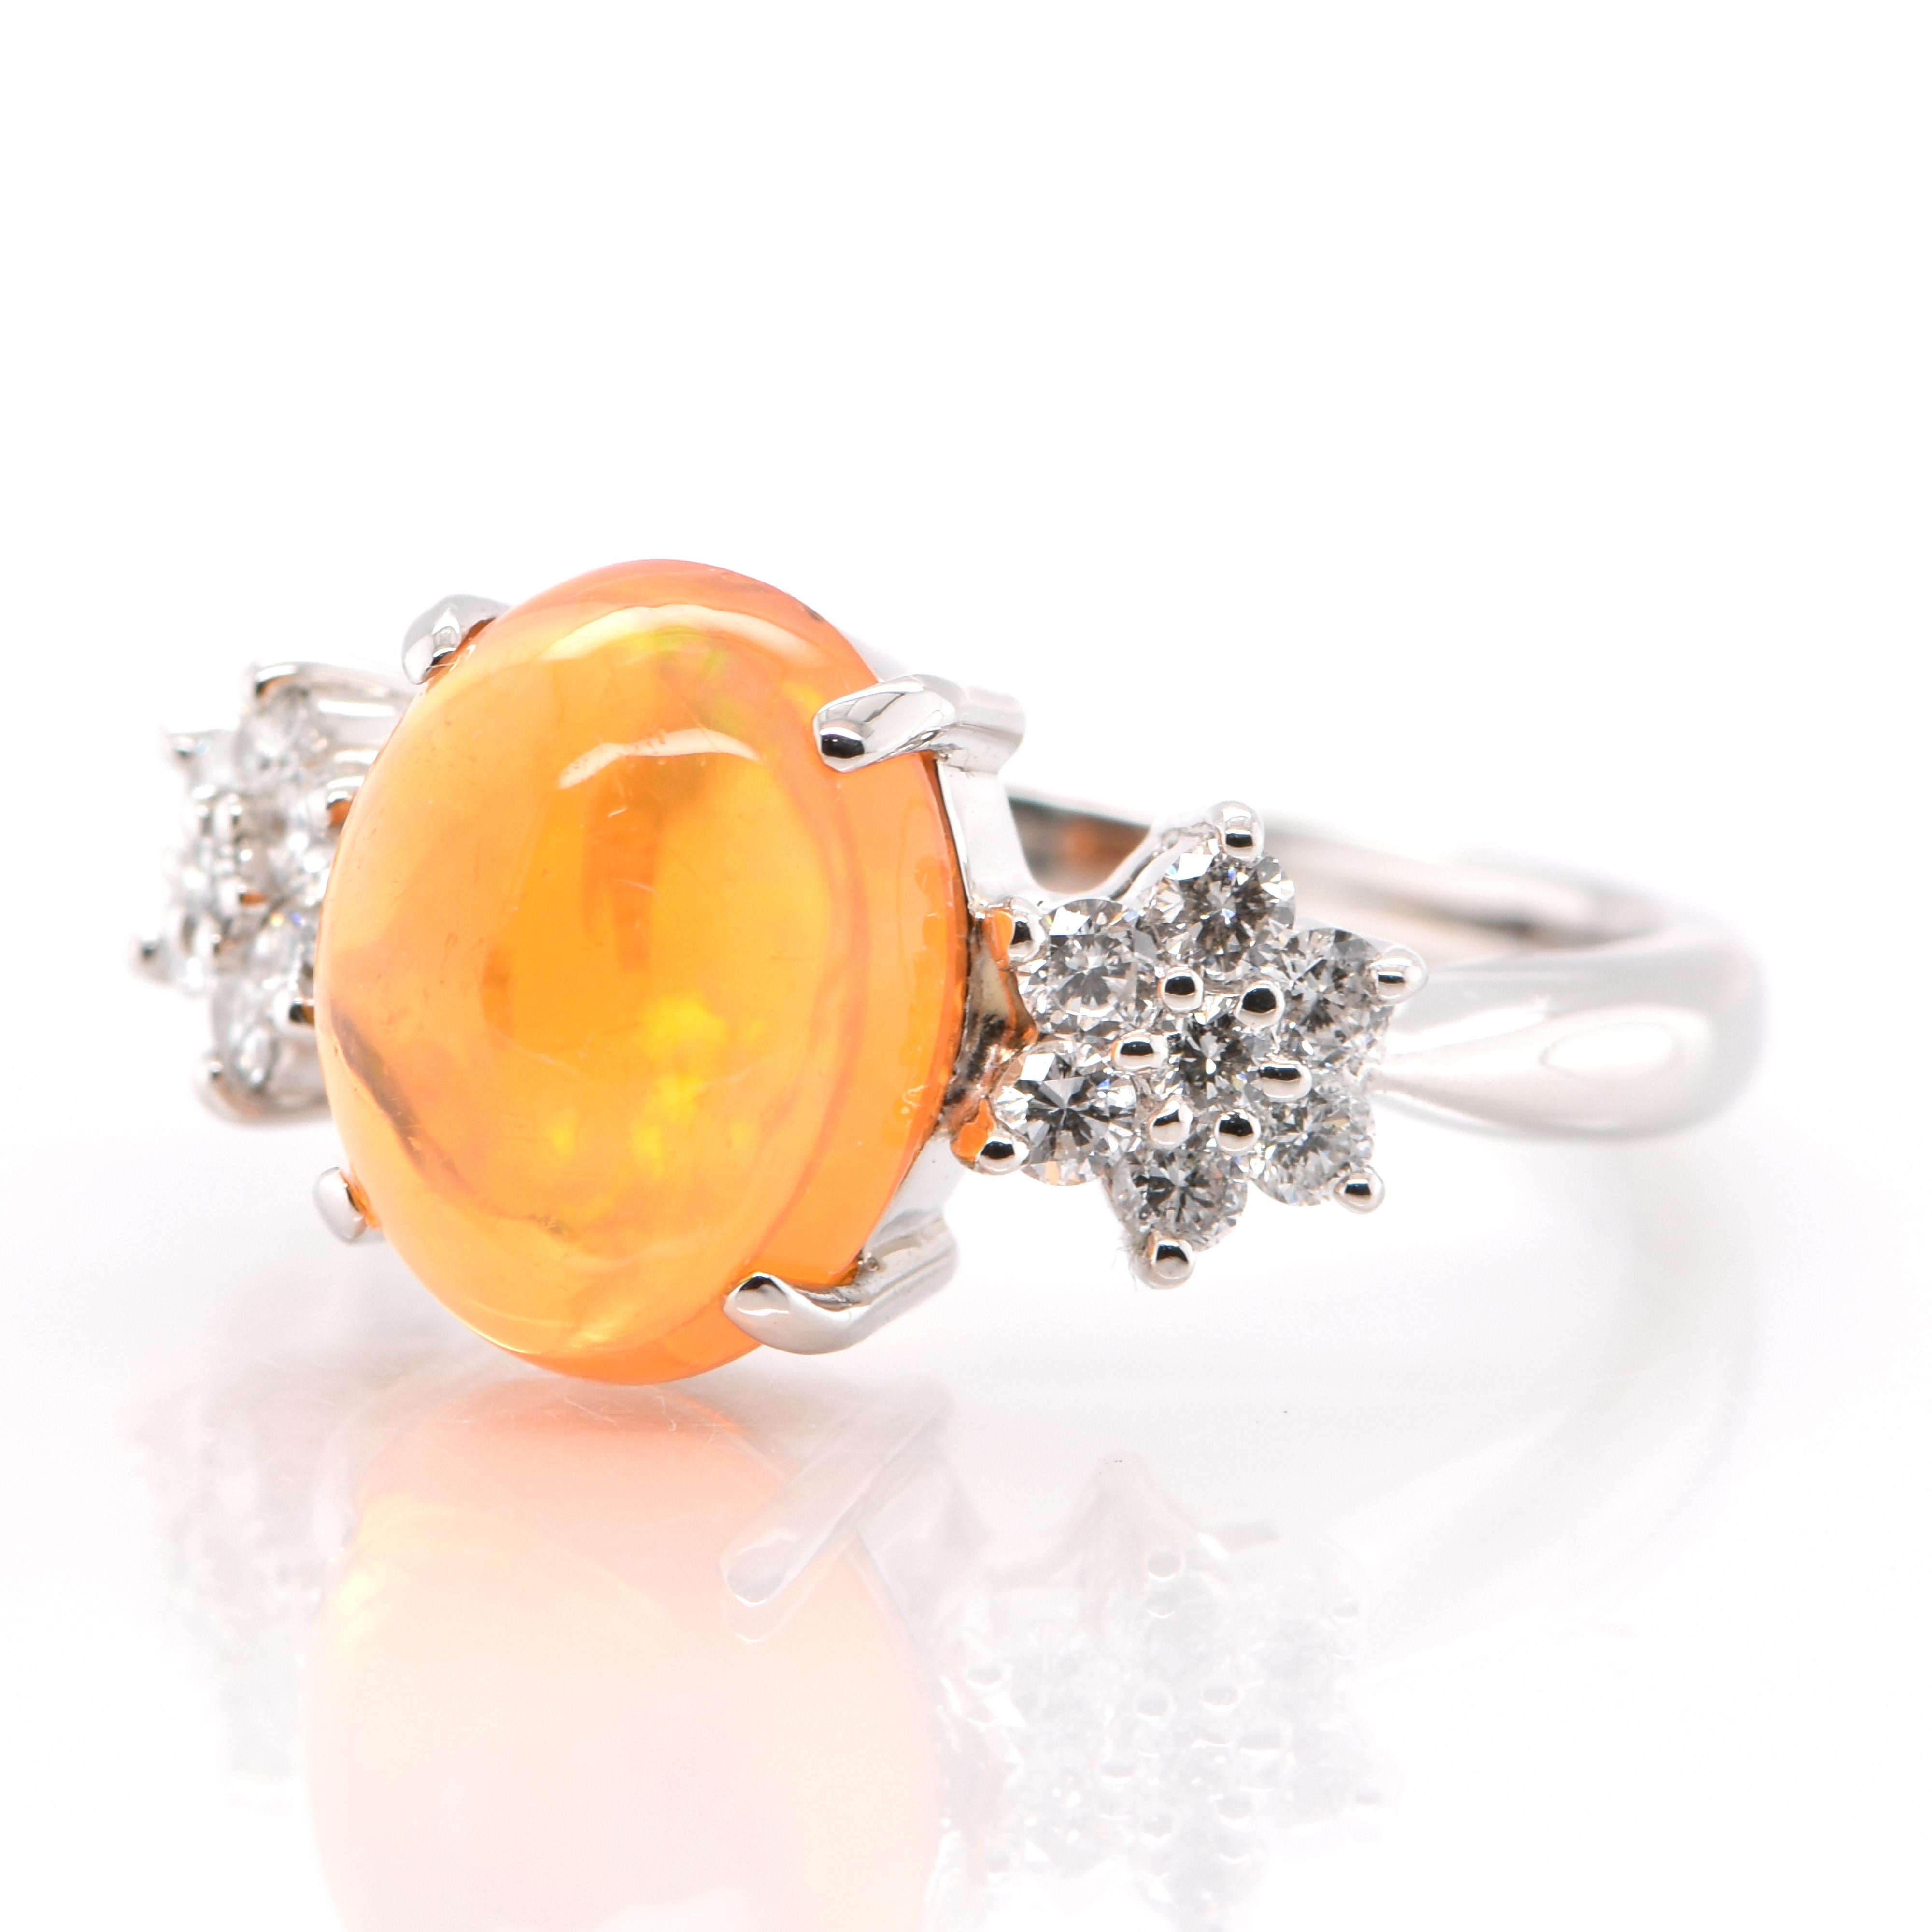 A beautiful Engagement Ring featuring a 3.22 Carat, Natural Mexican Fire Opal with very good play of color and 0.47 Carats of Diamond Accents set in Platinum. Opals are known for exhibiting flashes of rainbow colors known as 